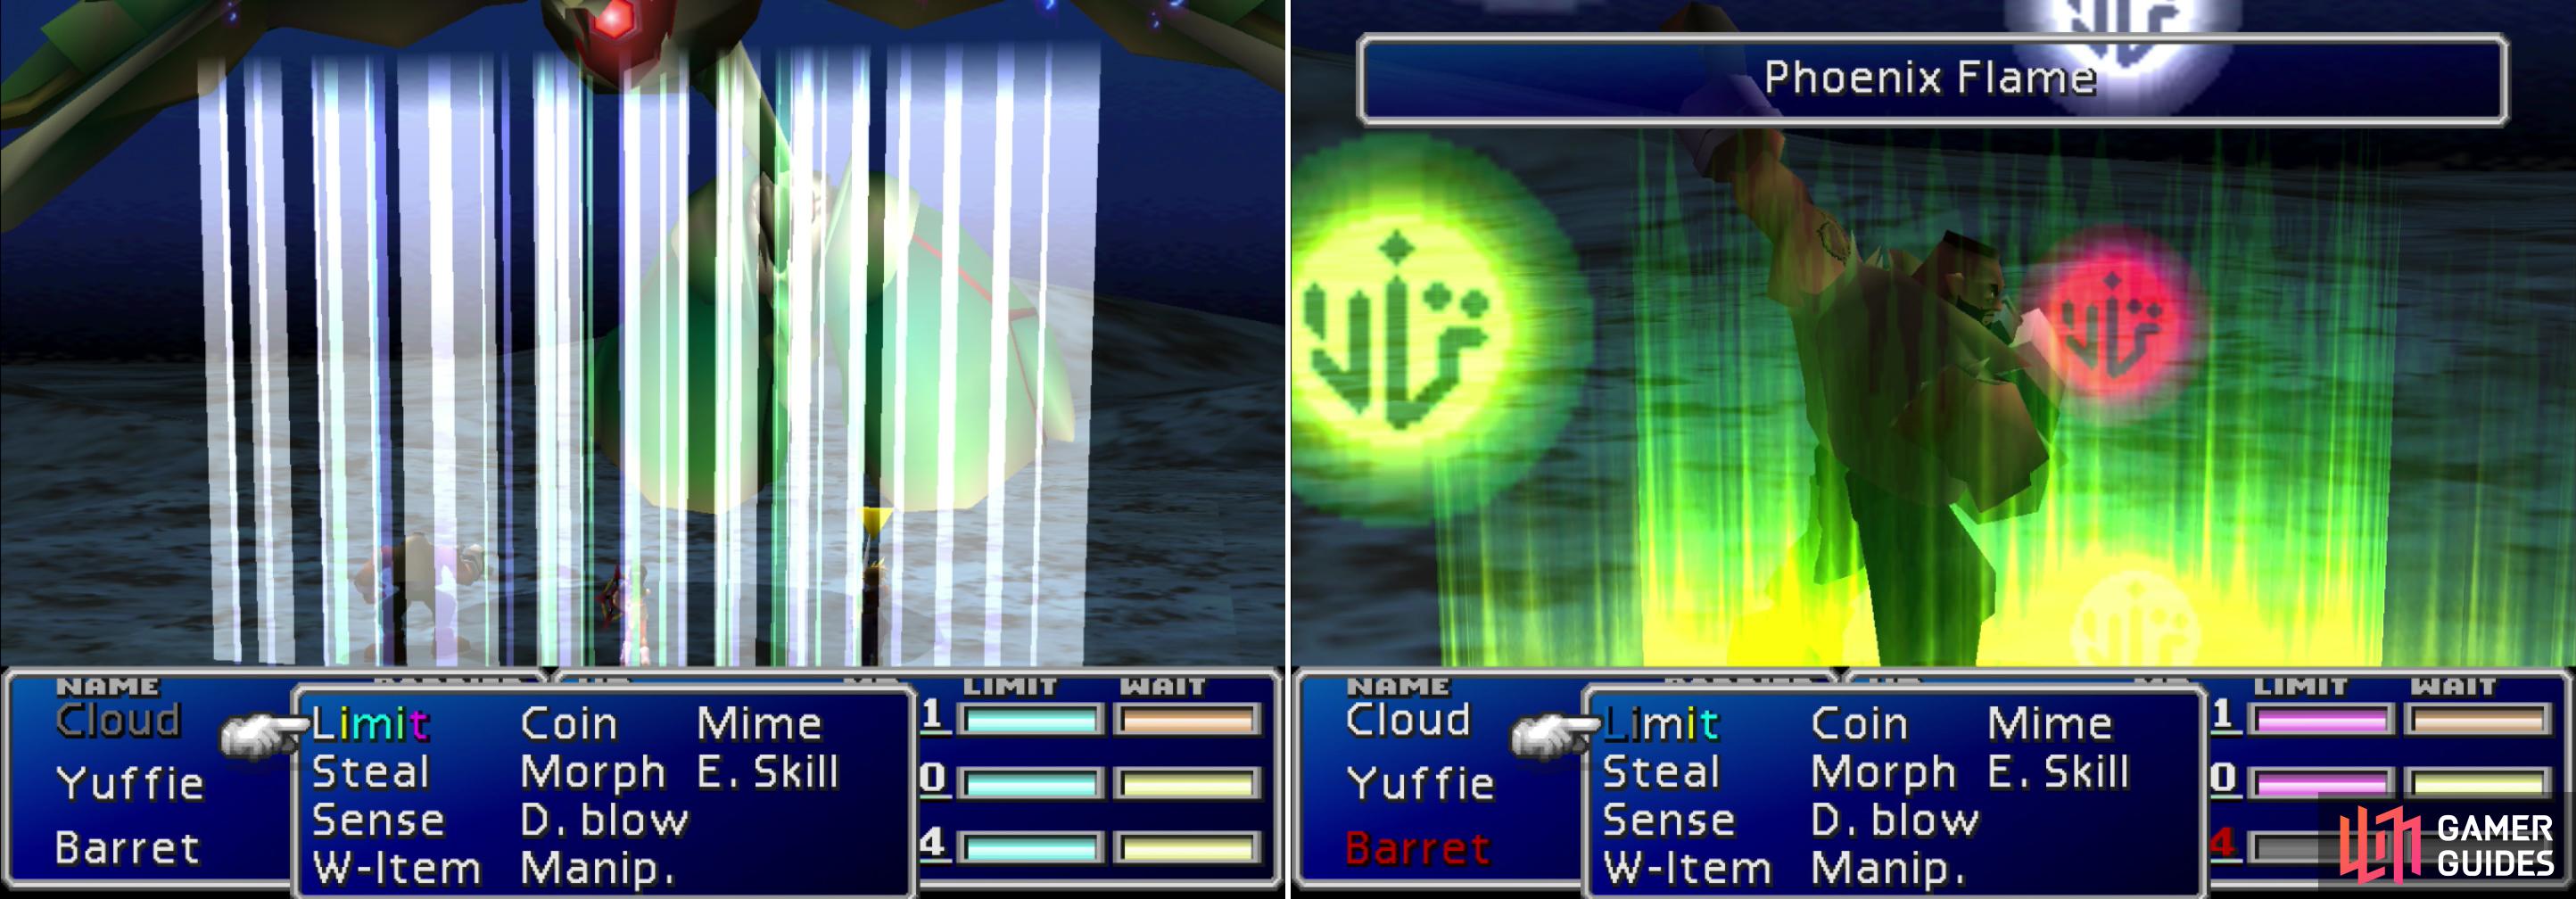 Emerald Weapons Aire Tam Storm is easily its most dangerous attack, dealing 1111 damage per piece of Materia a character has equipped (left). Having Phoenix + Final Attack Materia equipped will revive the party in case they get wiped out (right).